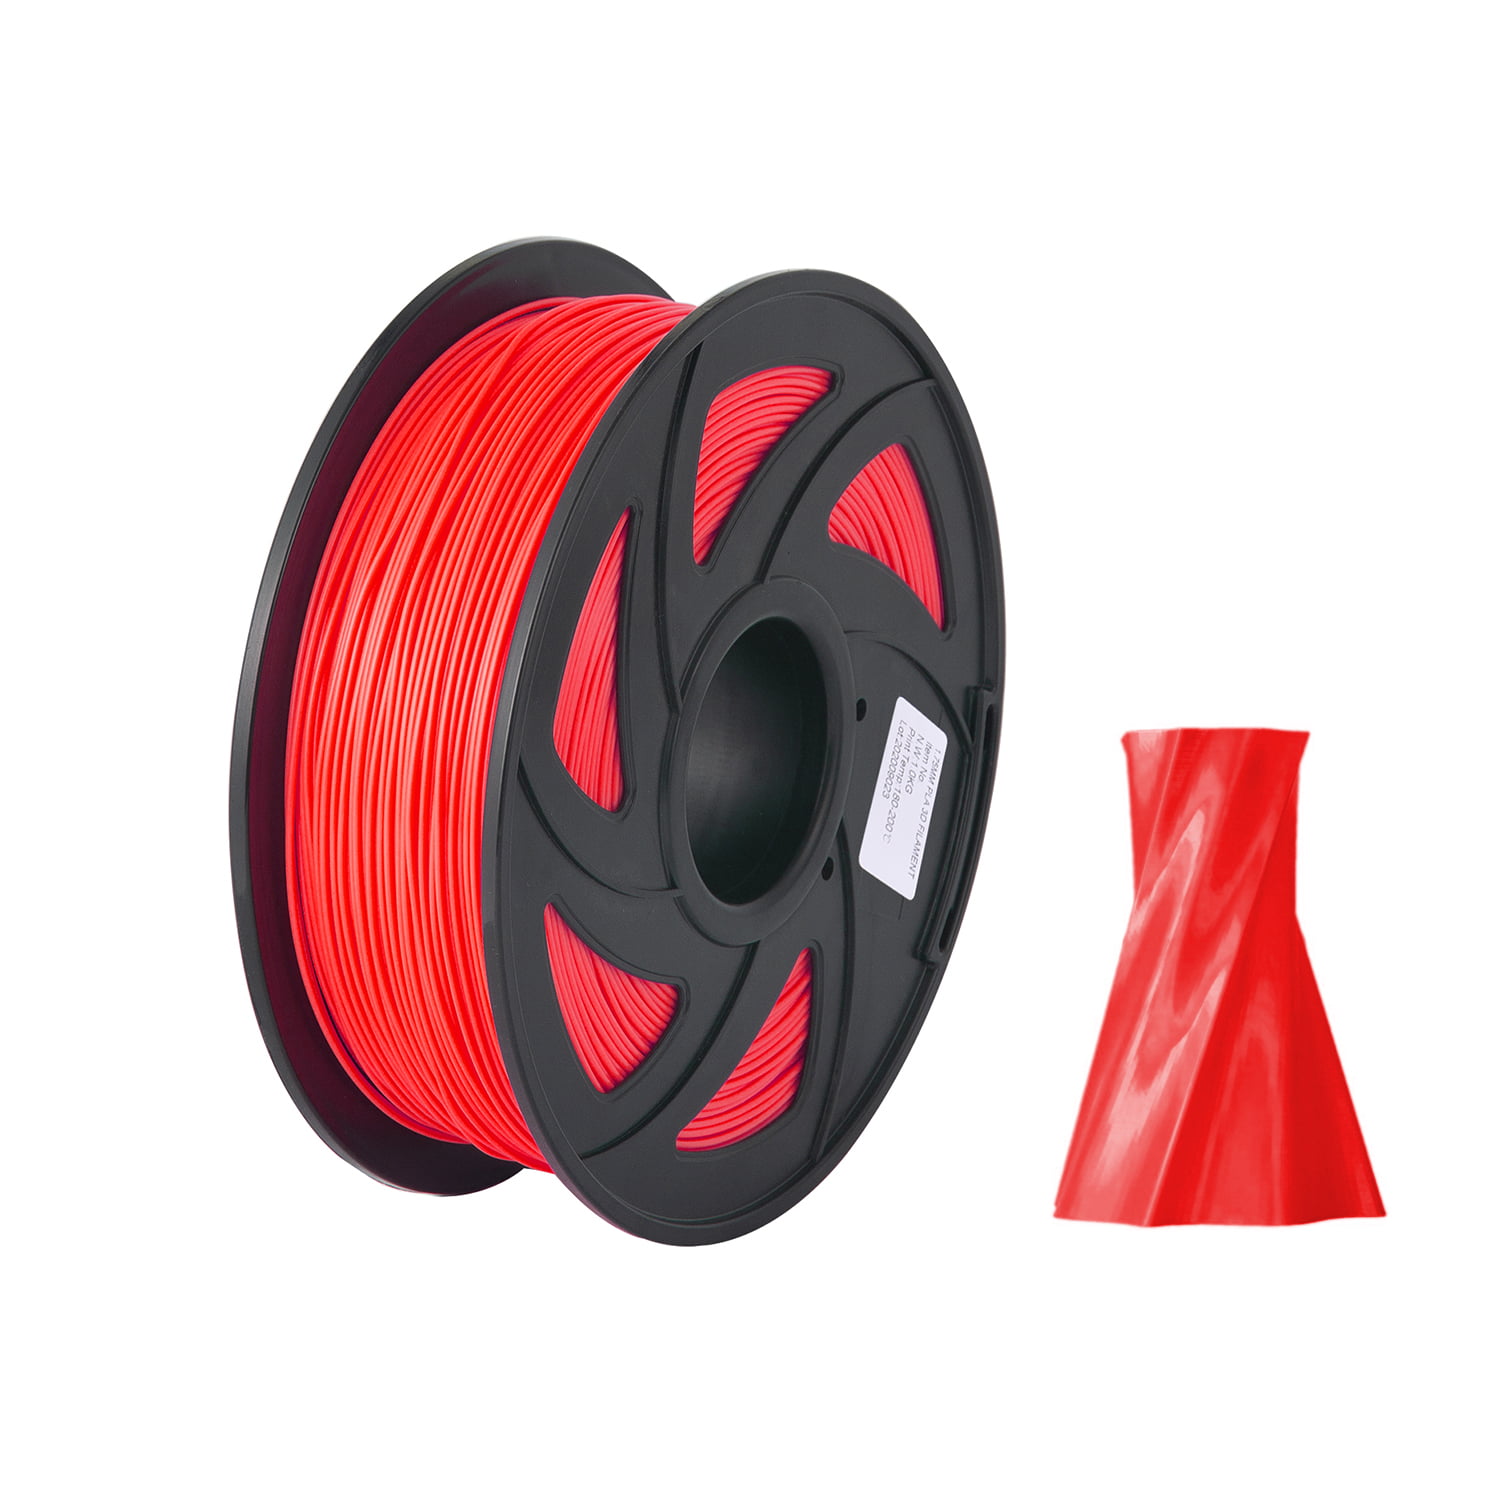 0.03 mm 1KG Spool Fit Most 3D FDM Printers PLA Filament,BIQU PLA 3D Printer Filament 1.75mm Silver 3D Printer Filament,Easy to Print,Dimensional Accuracy / 